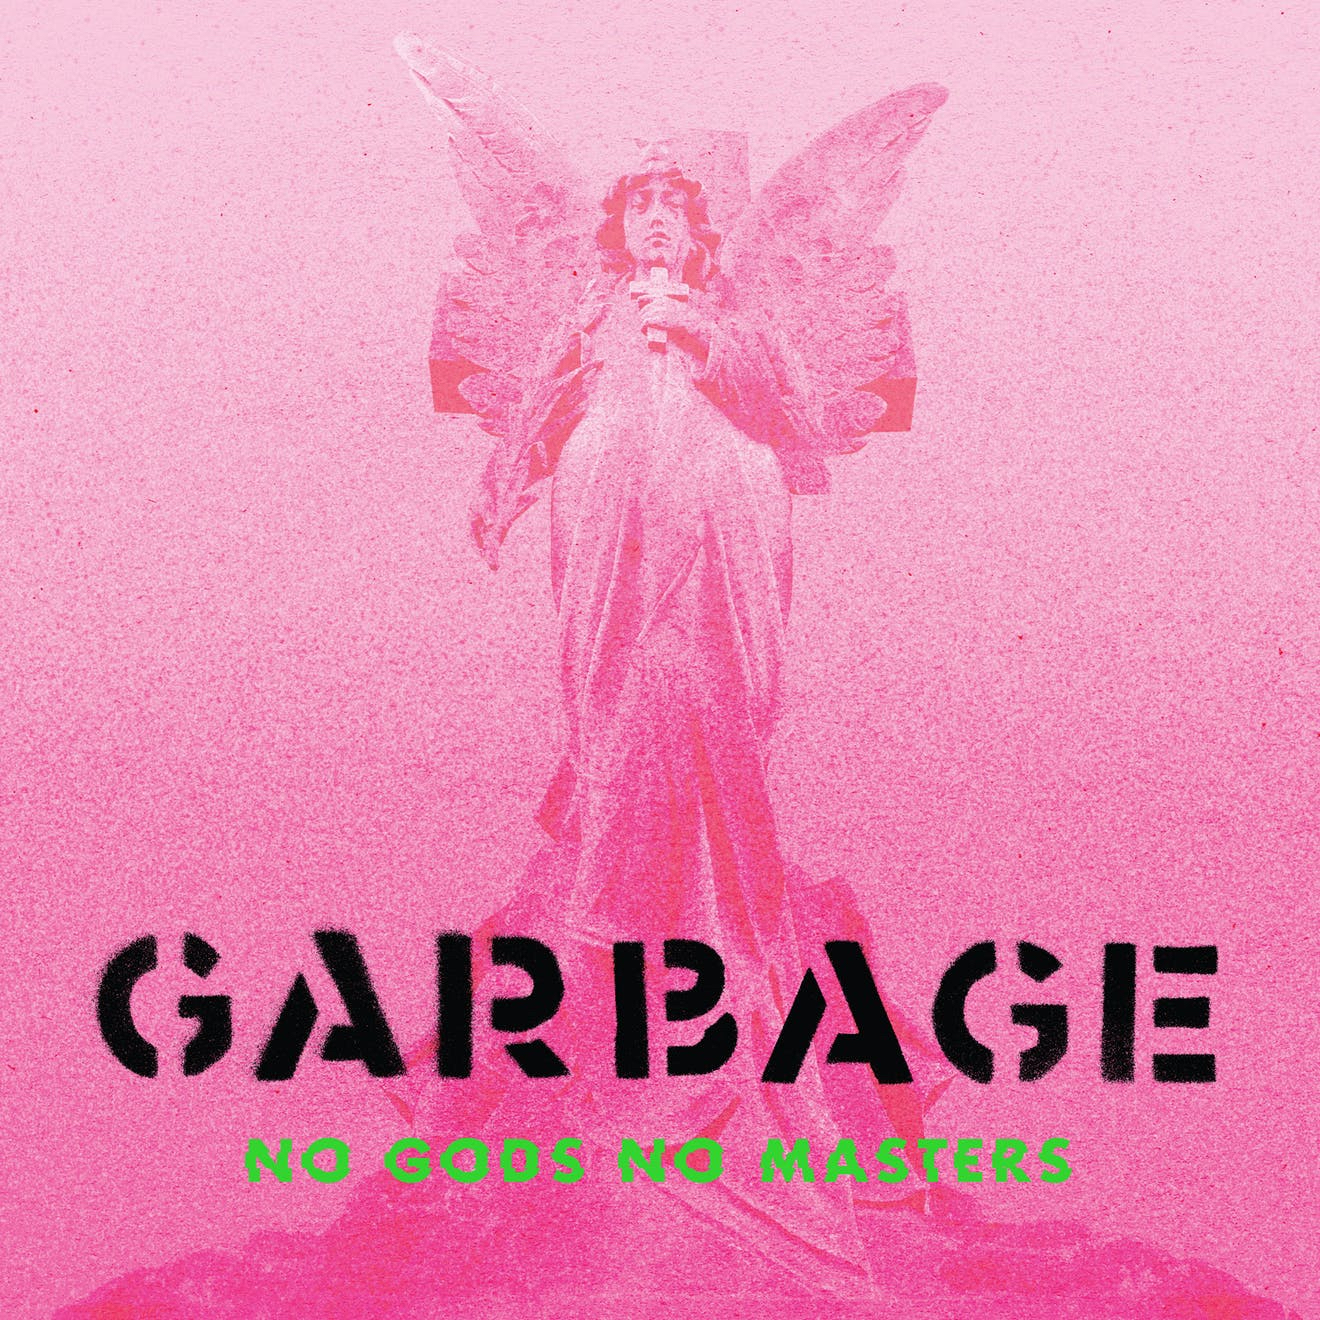 Garbage "No Goods no Masters" Clear Pink LP (rsd 2021)